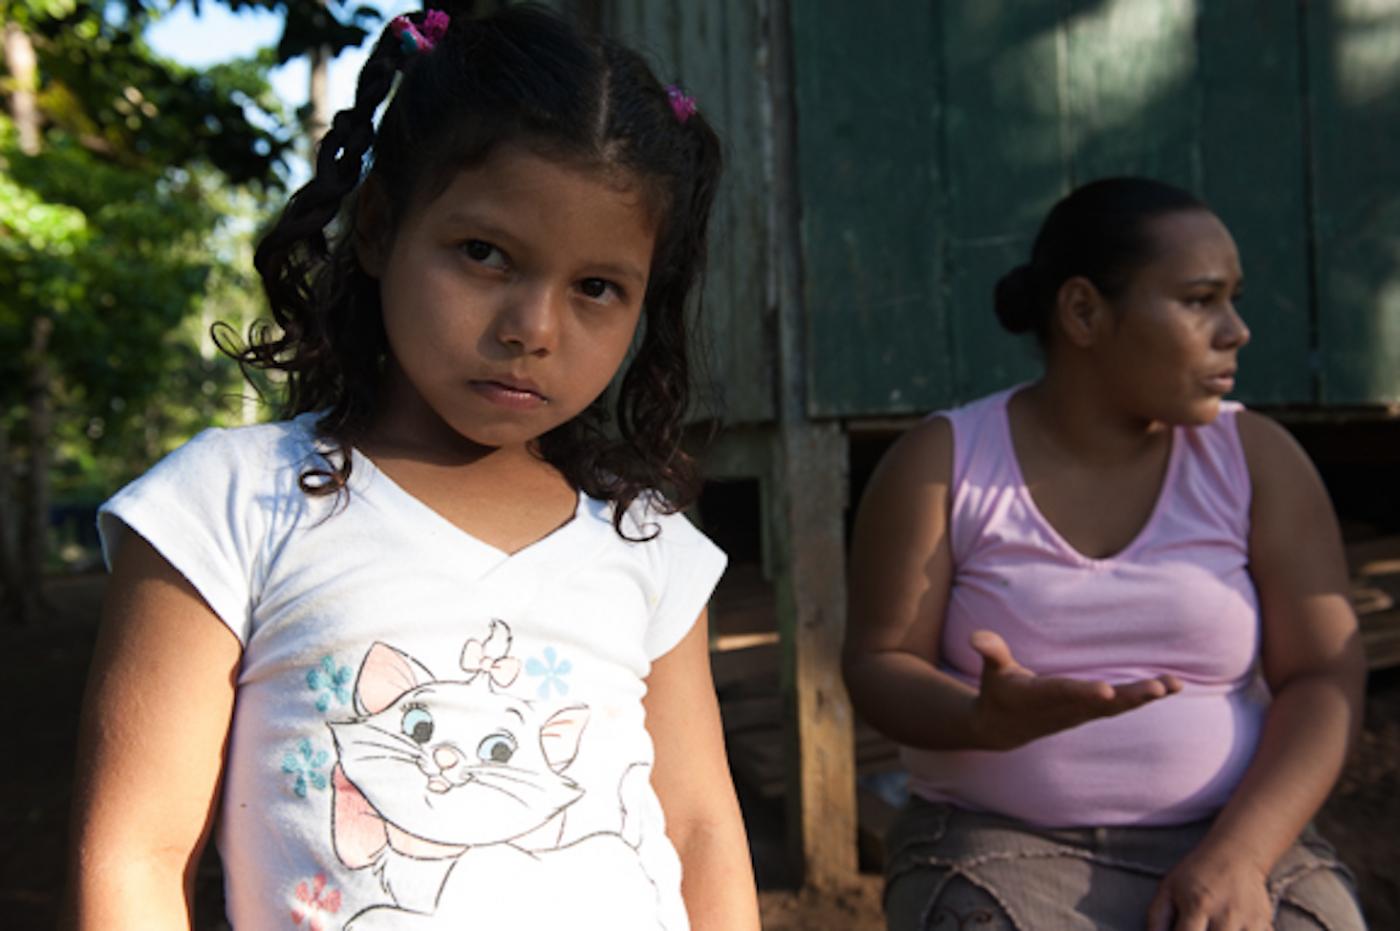 Campesinas in Nicaragua face uncertainty as a consequence of the palm oil industry.